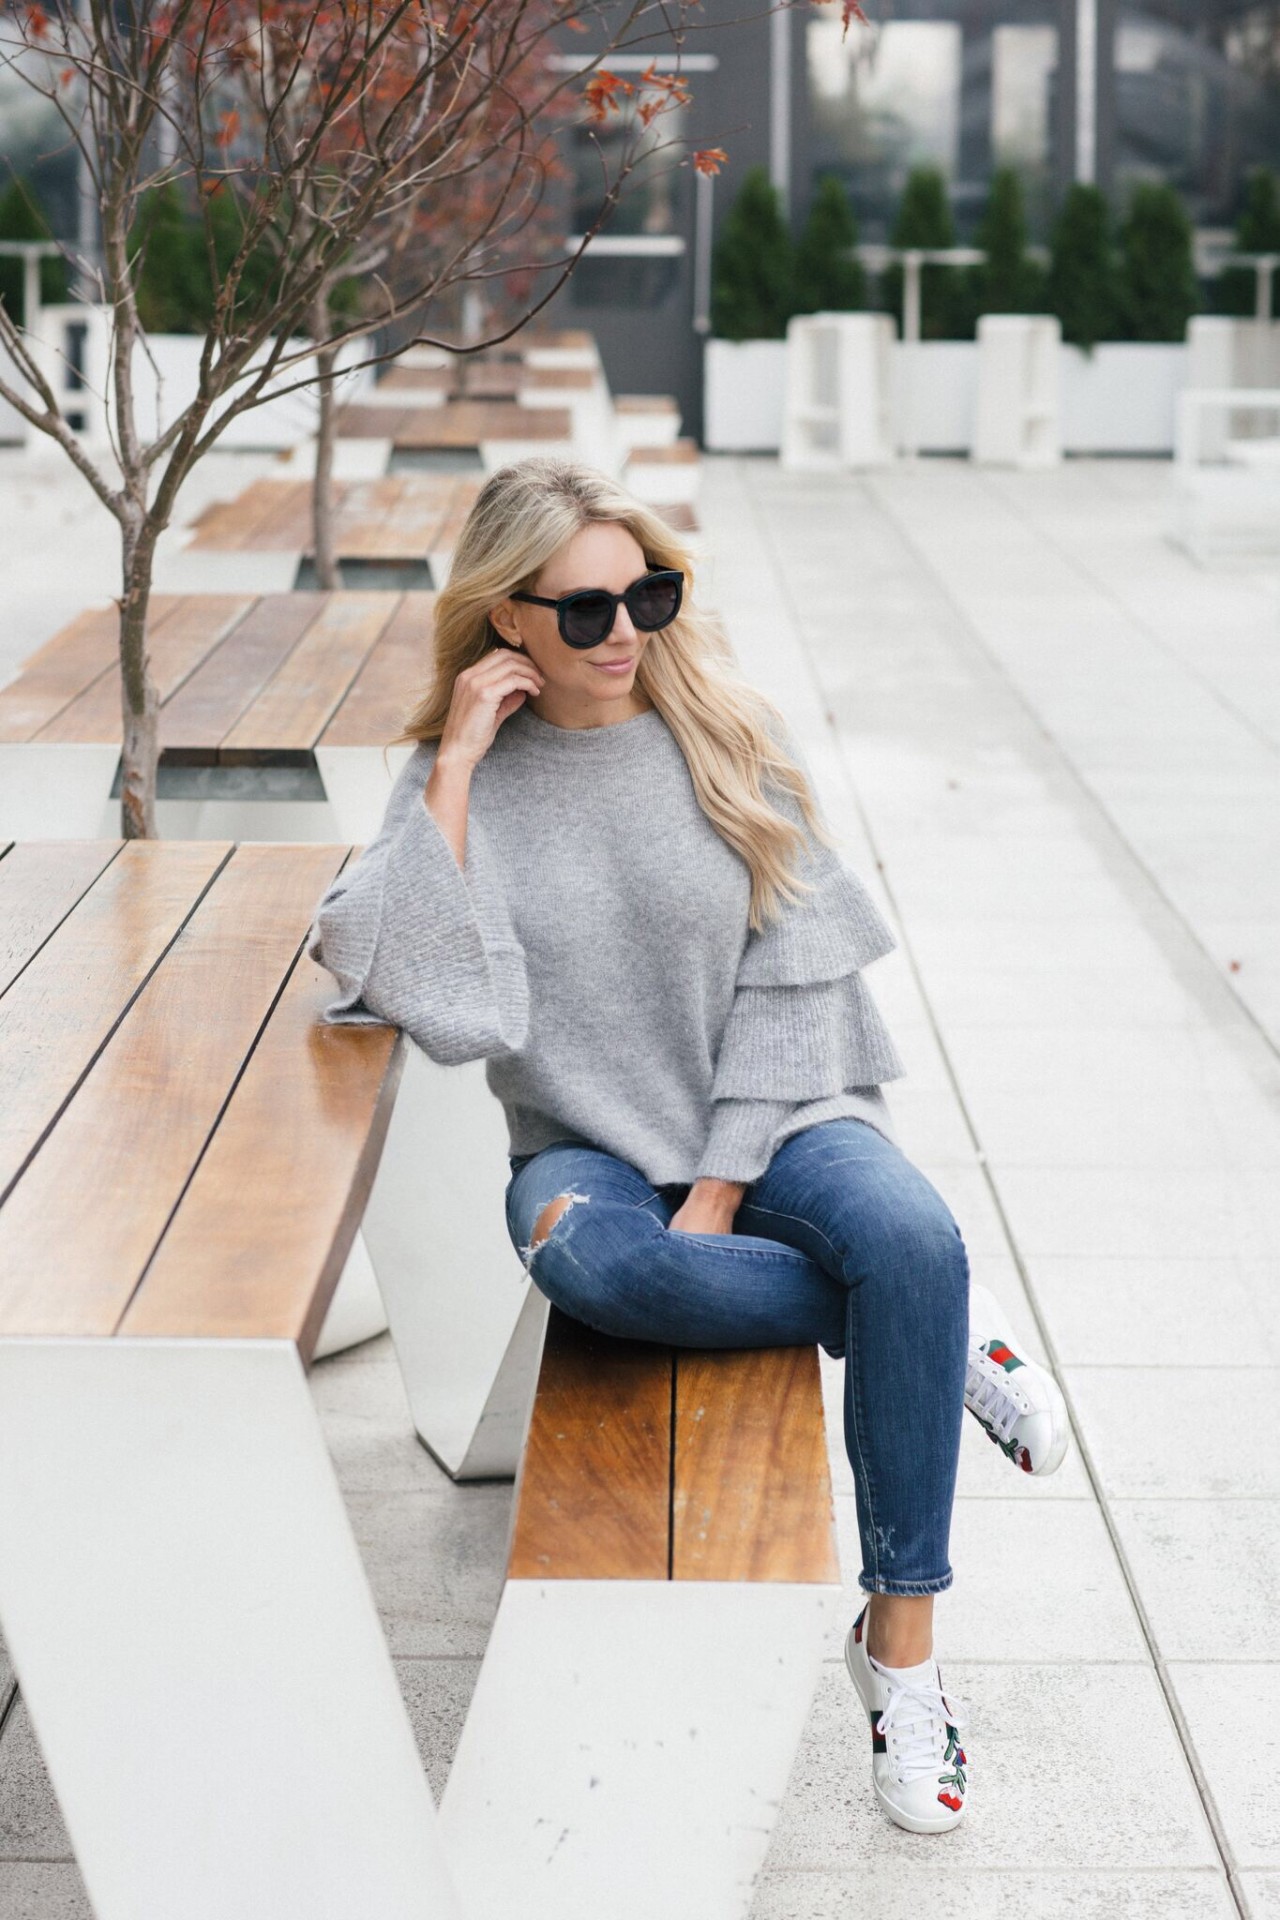 Ruffle Tops + Statement Sneakers - Lunchpails and Lipstick